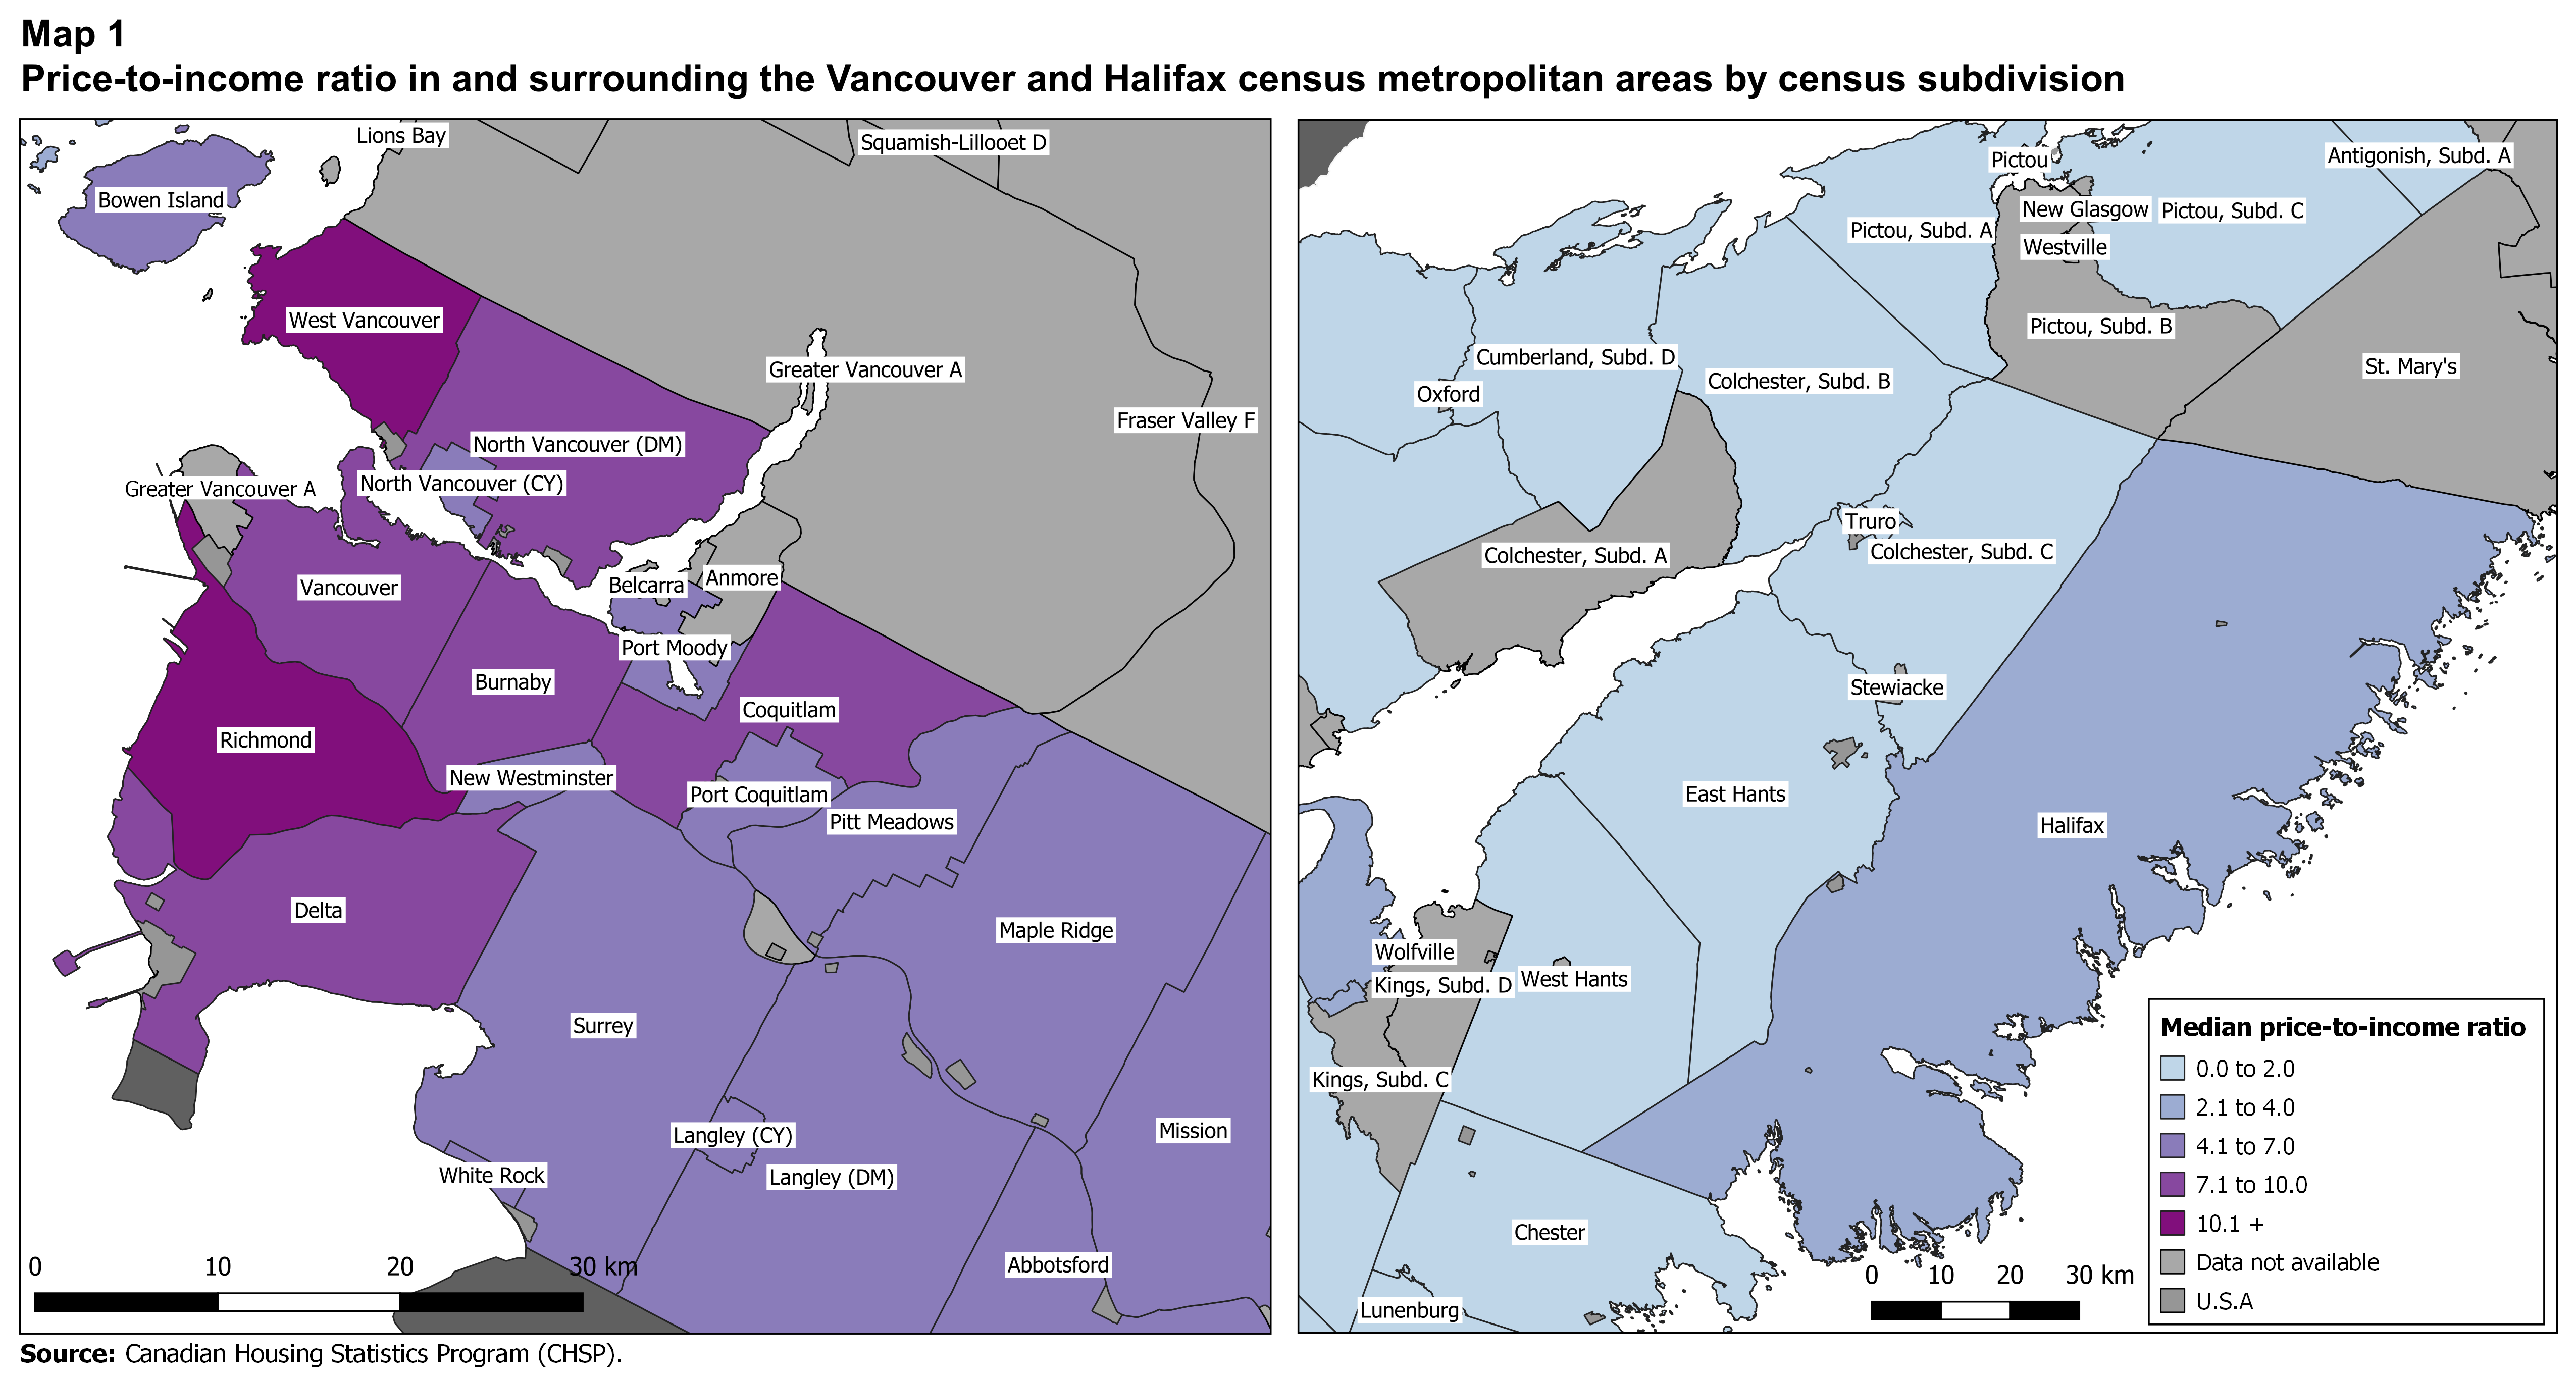 Map 1. Median price-to-income ratio ranges in and surrounding the Vancouver and Halifax census metropolitan areas
by census subdivision